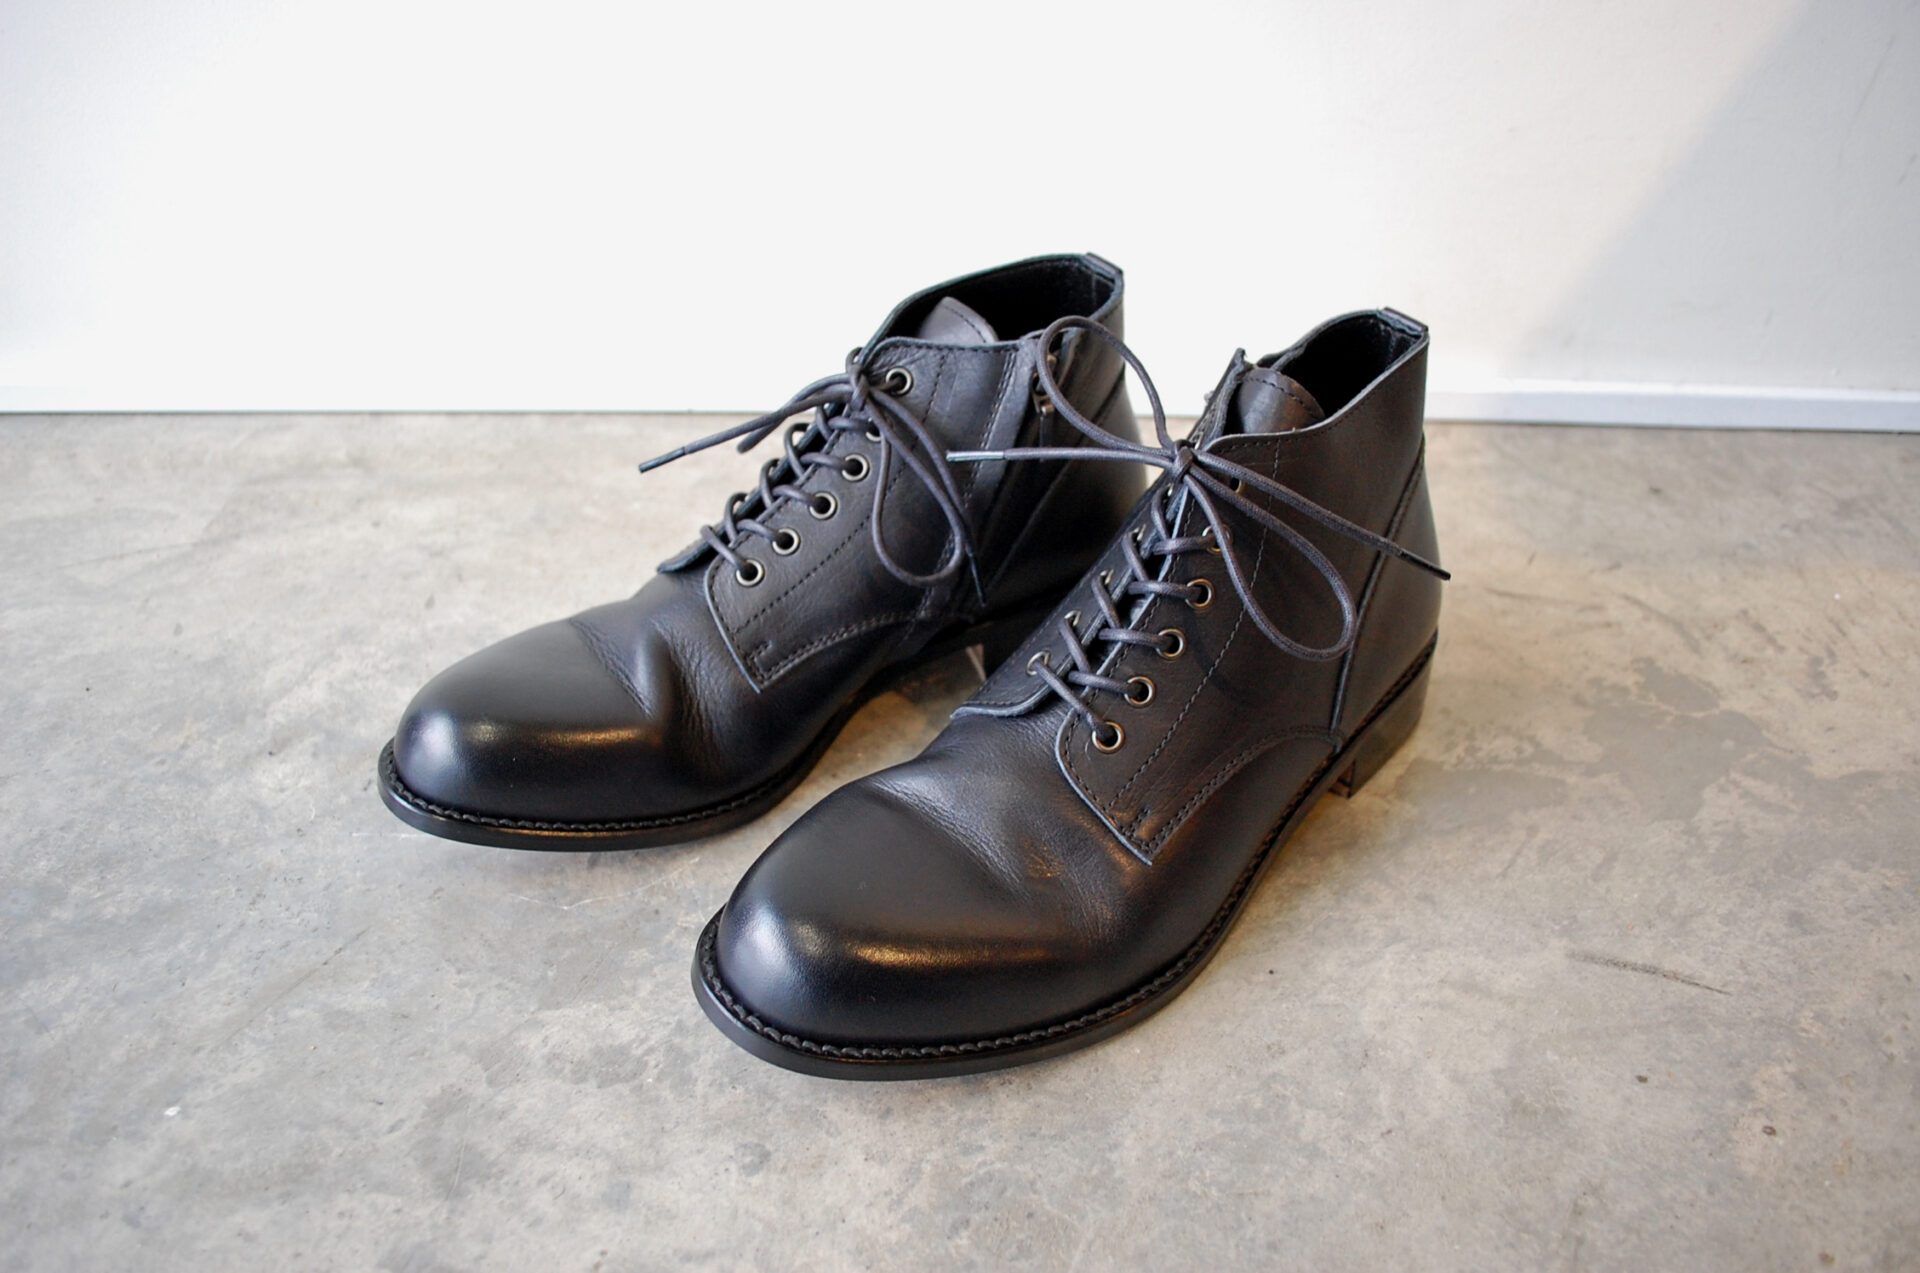 PADRONE パドローネ PU7358-1205-23A CHUKKA BOOTS with SIDE ZIP